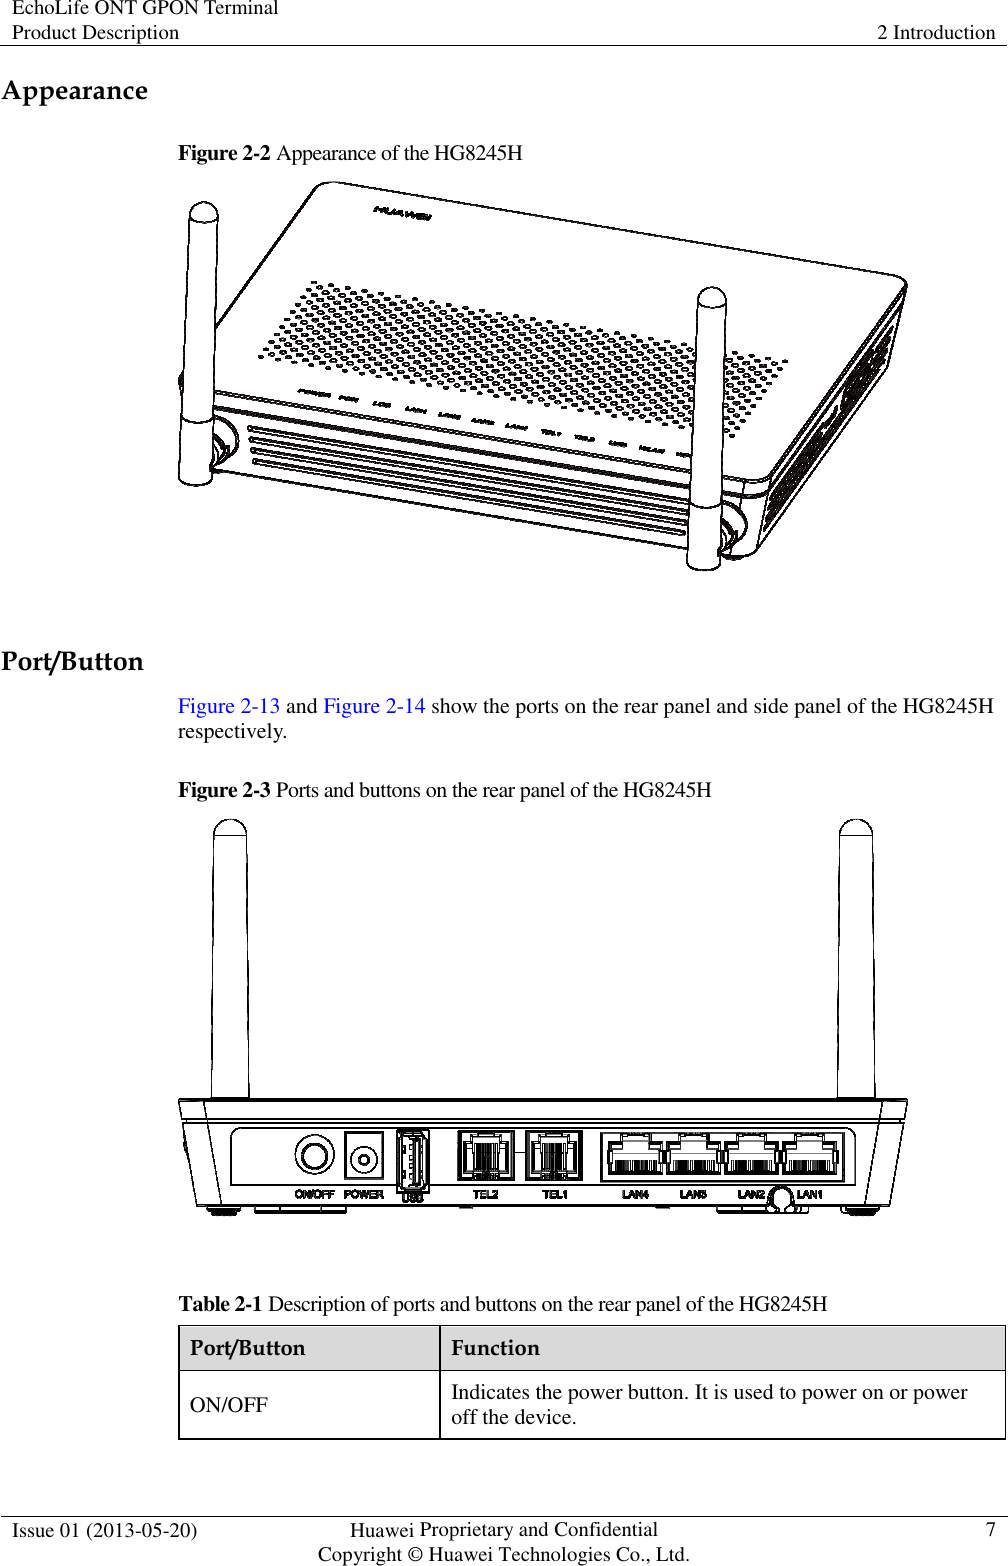 EchoLife ONT GPON Terminal Product Description  2 Introduction  Issue 01 (2013-05-20)  Huawei Proprietary and Confidential                                     Copyright © Huawei Technologies Co., Ltd. 7  Appearance Figure 2-2 Appearance of the HG8245H   Port/Button Figure 2-13 and Figure 2-14 show the ports on the rear panel and side panel of the HG8245H respectively. Figure 2-3 Ports and buttons on the rear panel of the HG8245H   Table 2-1 Description of ports and buttons on the rear panel of the HG8245H Port/Button  Function ON/OFF  Indicates the power button. It is used to power on or power off the device. 